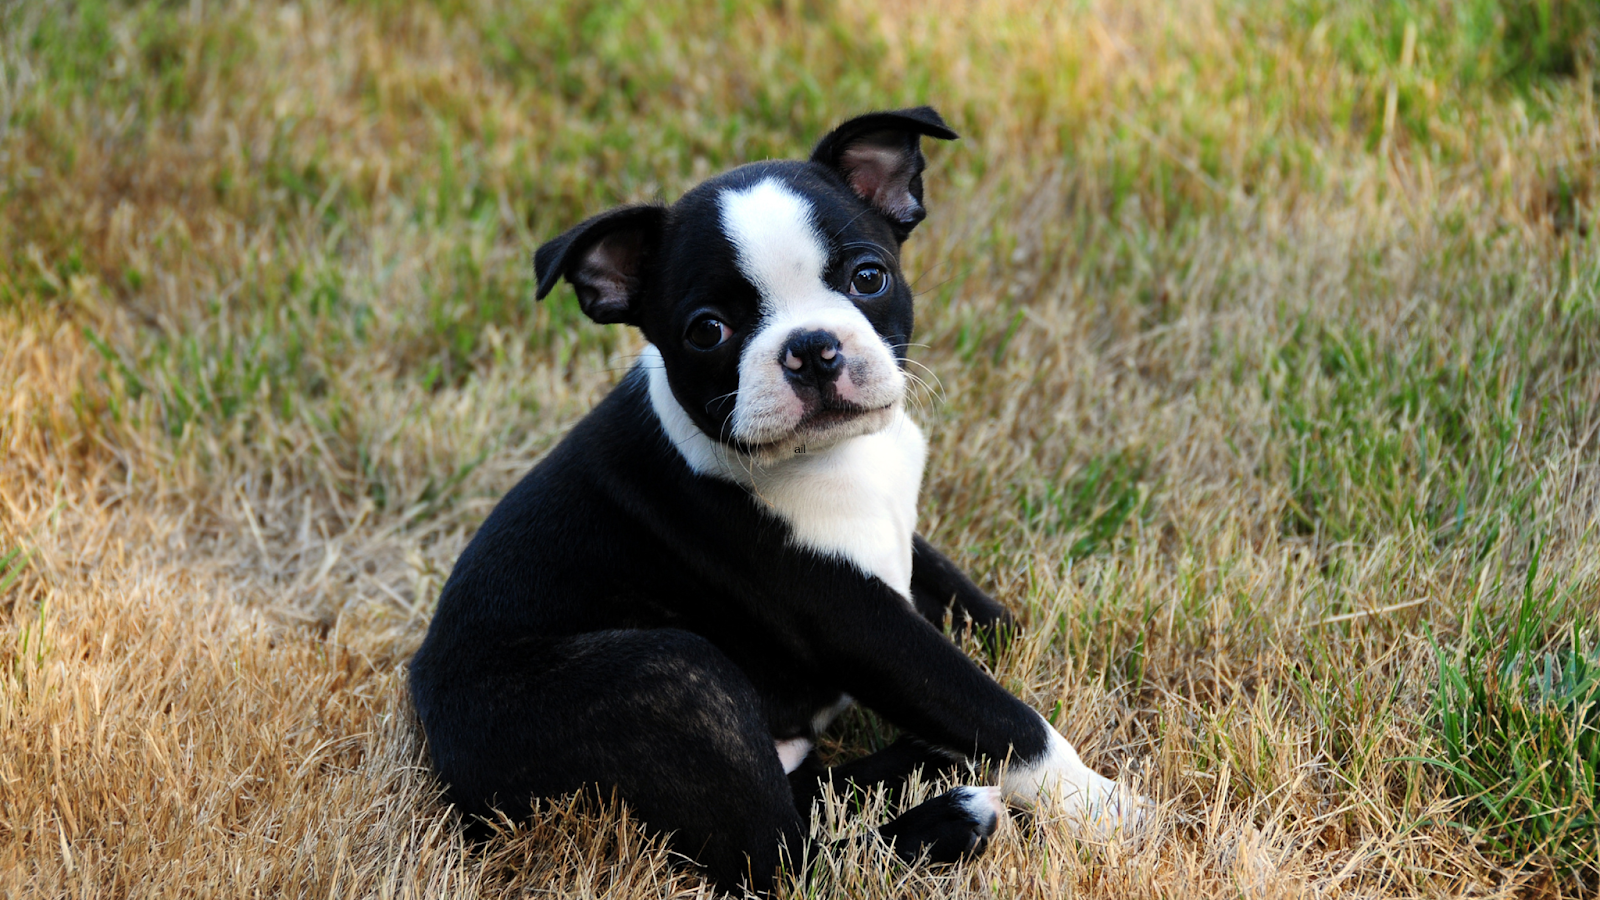 Boston Terrier with ears not standing up yet